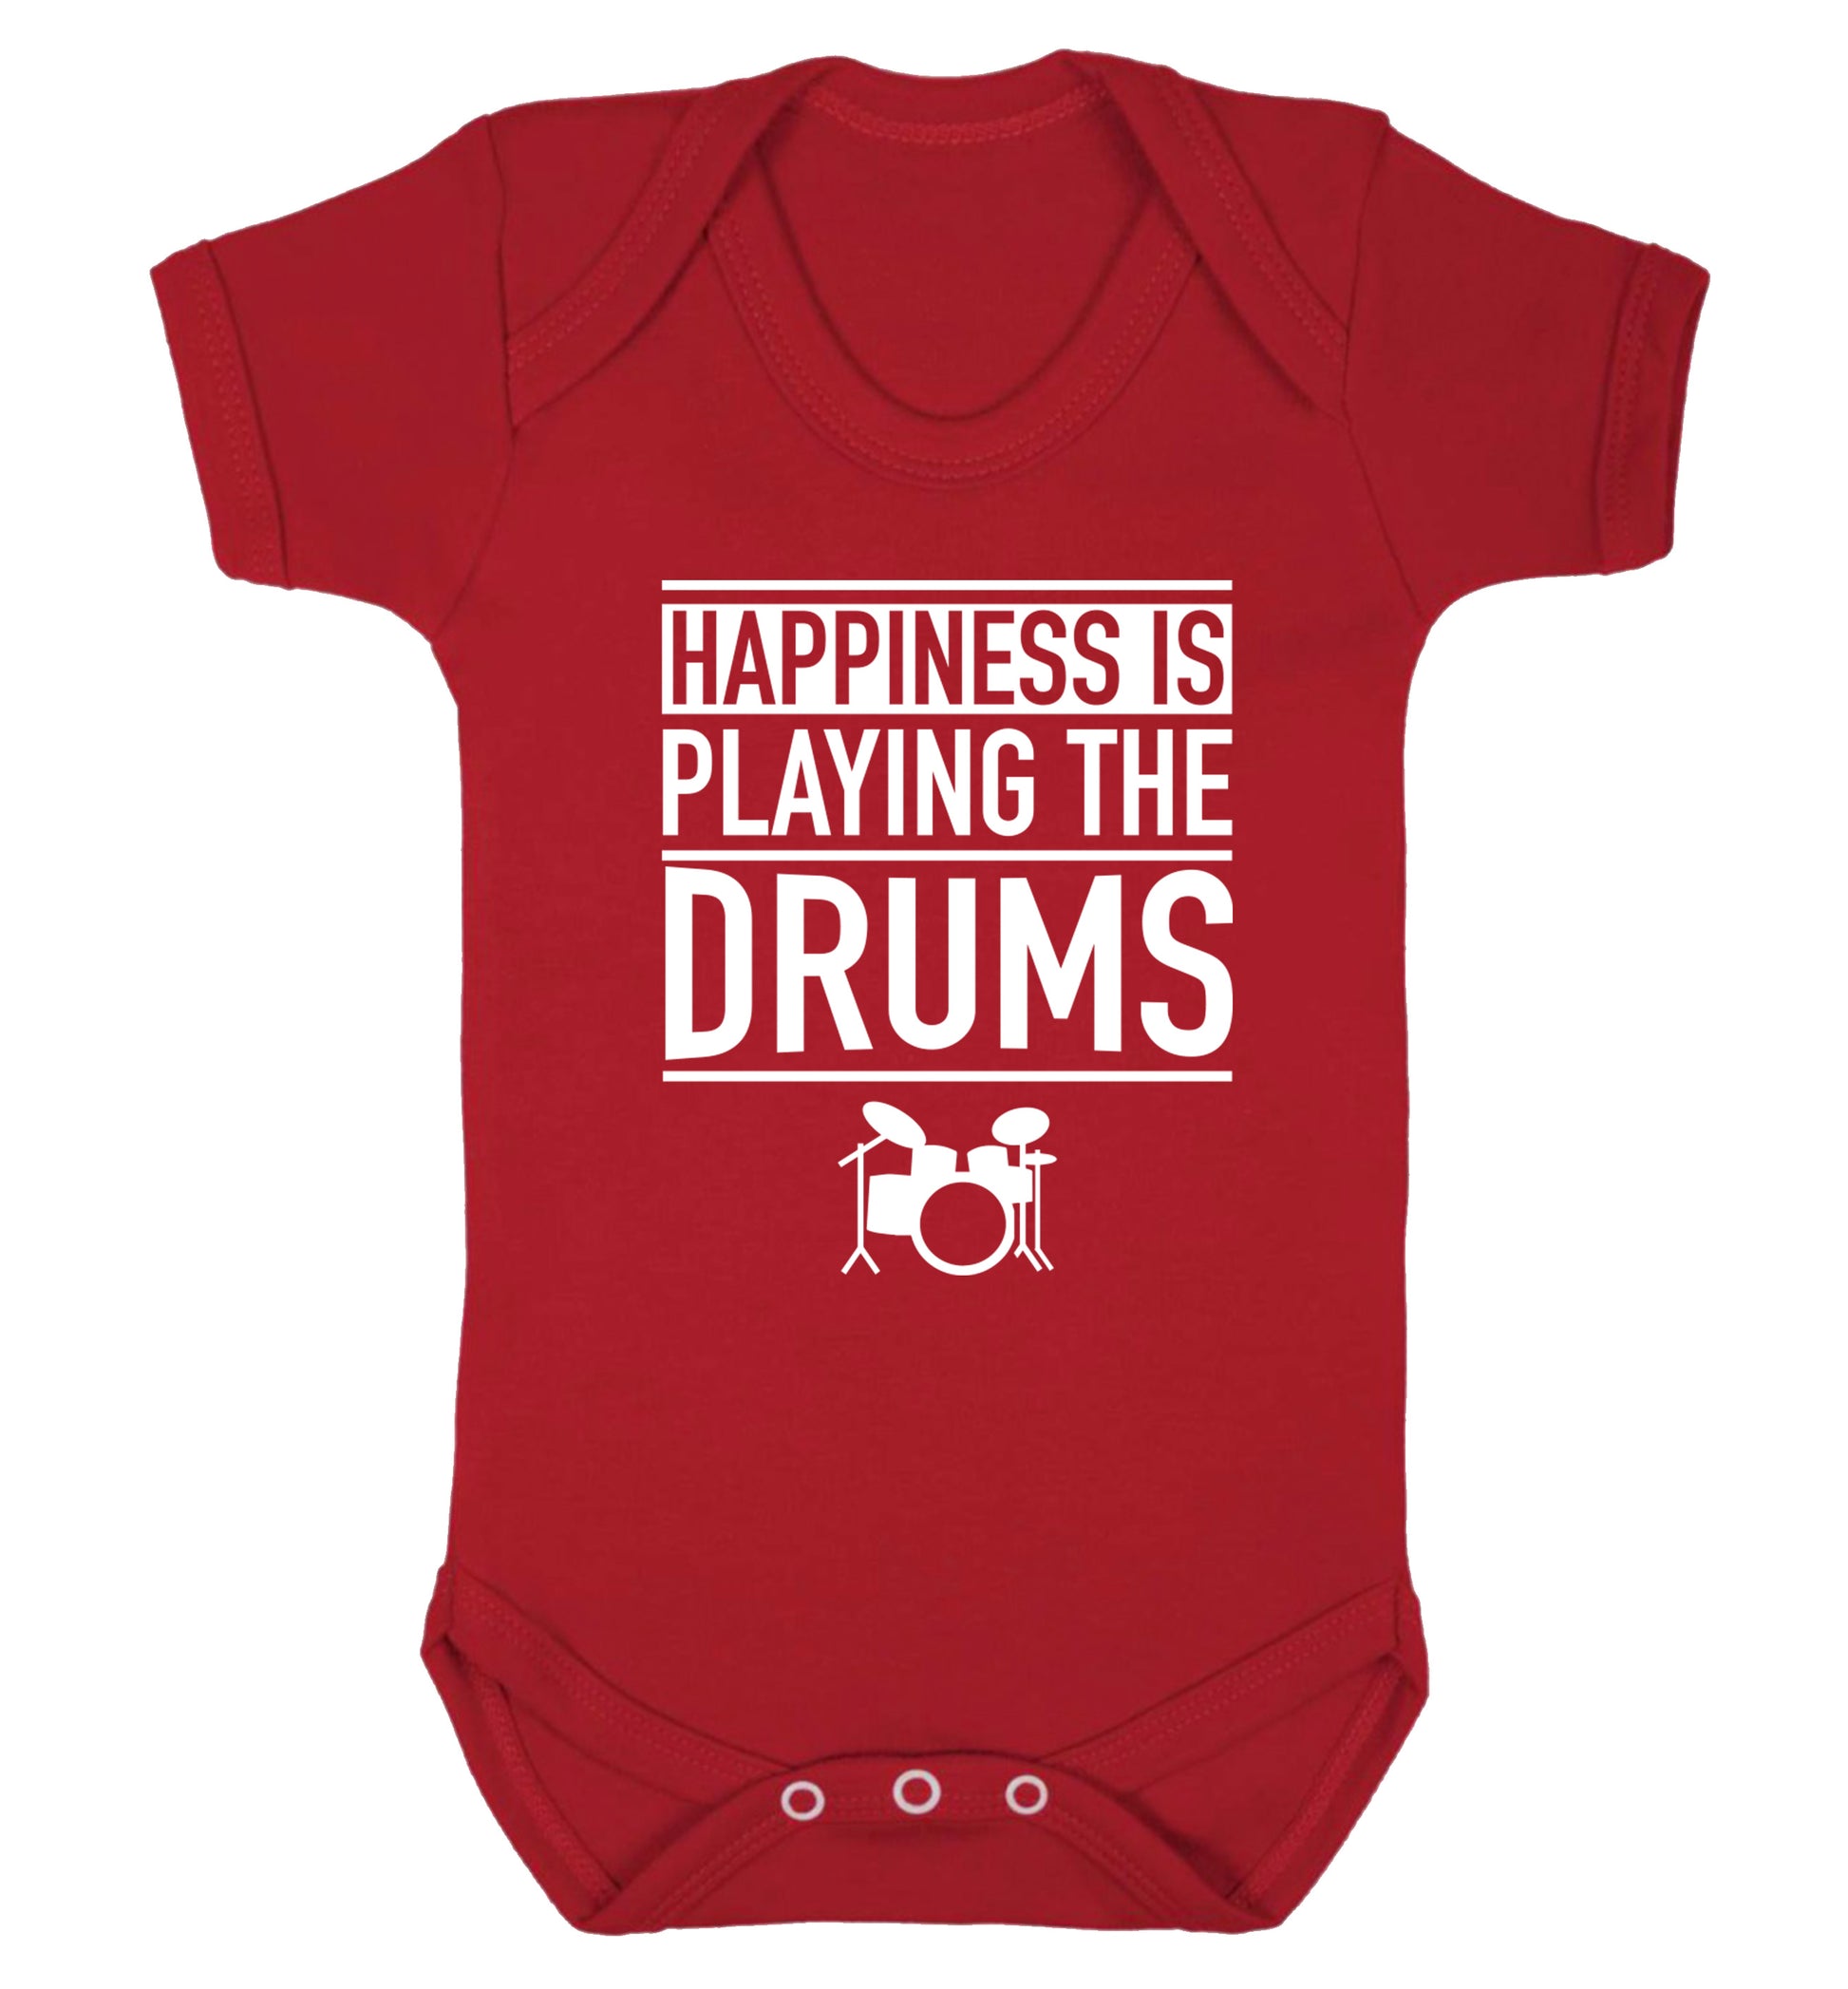 Happiness is playing the drums Baby Vest red 18-24 months